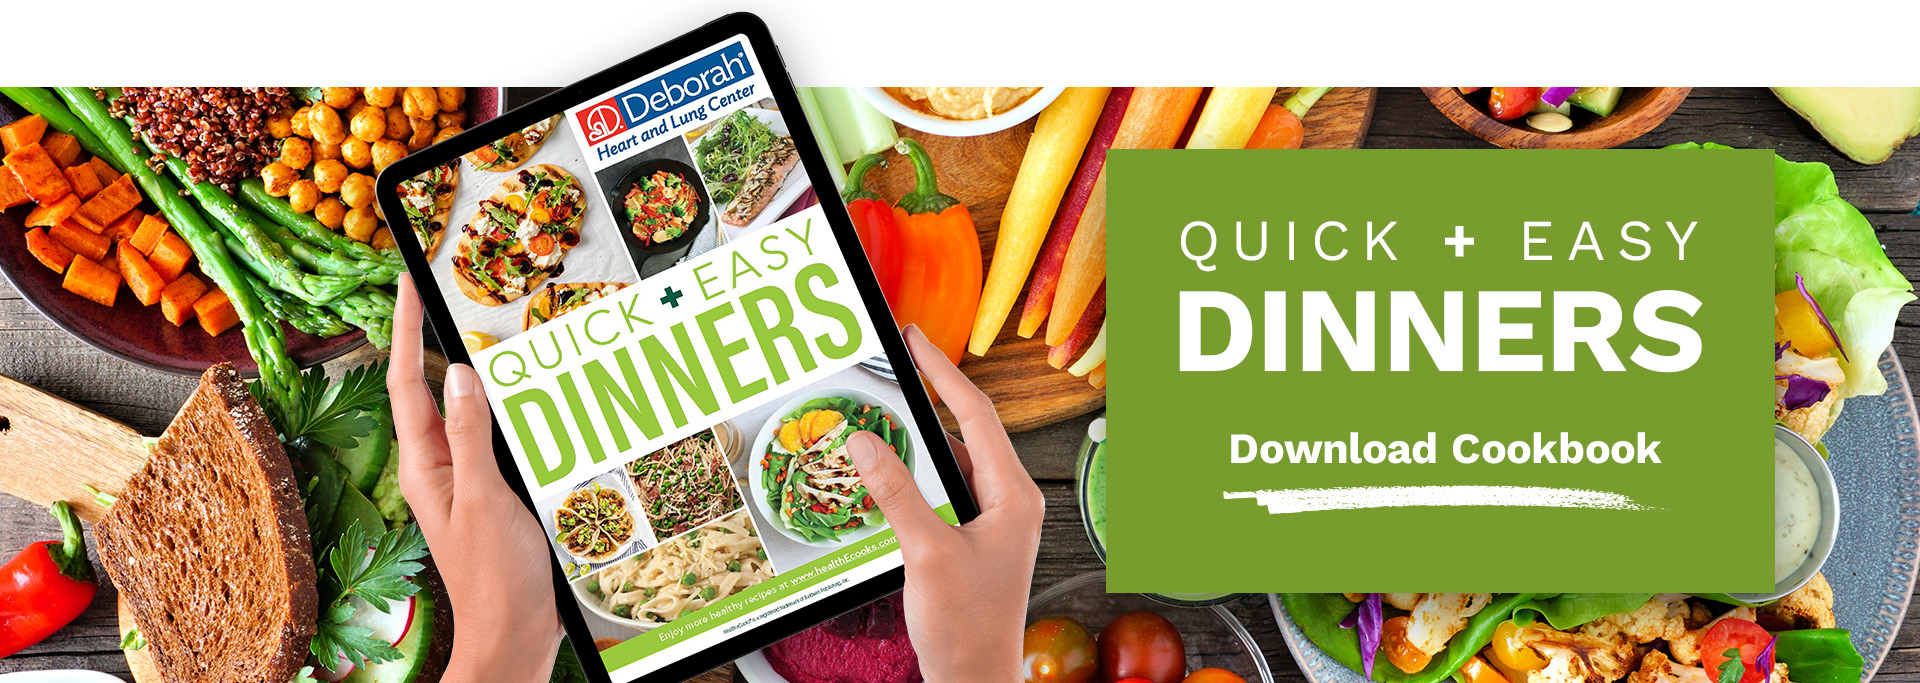 Quick + Easy Dinners Cookbook and Food